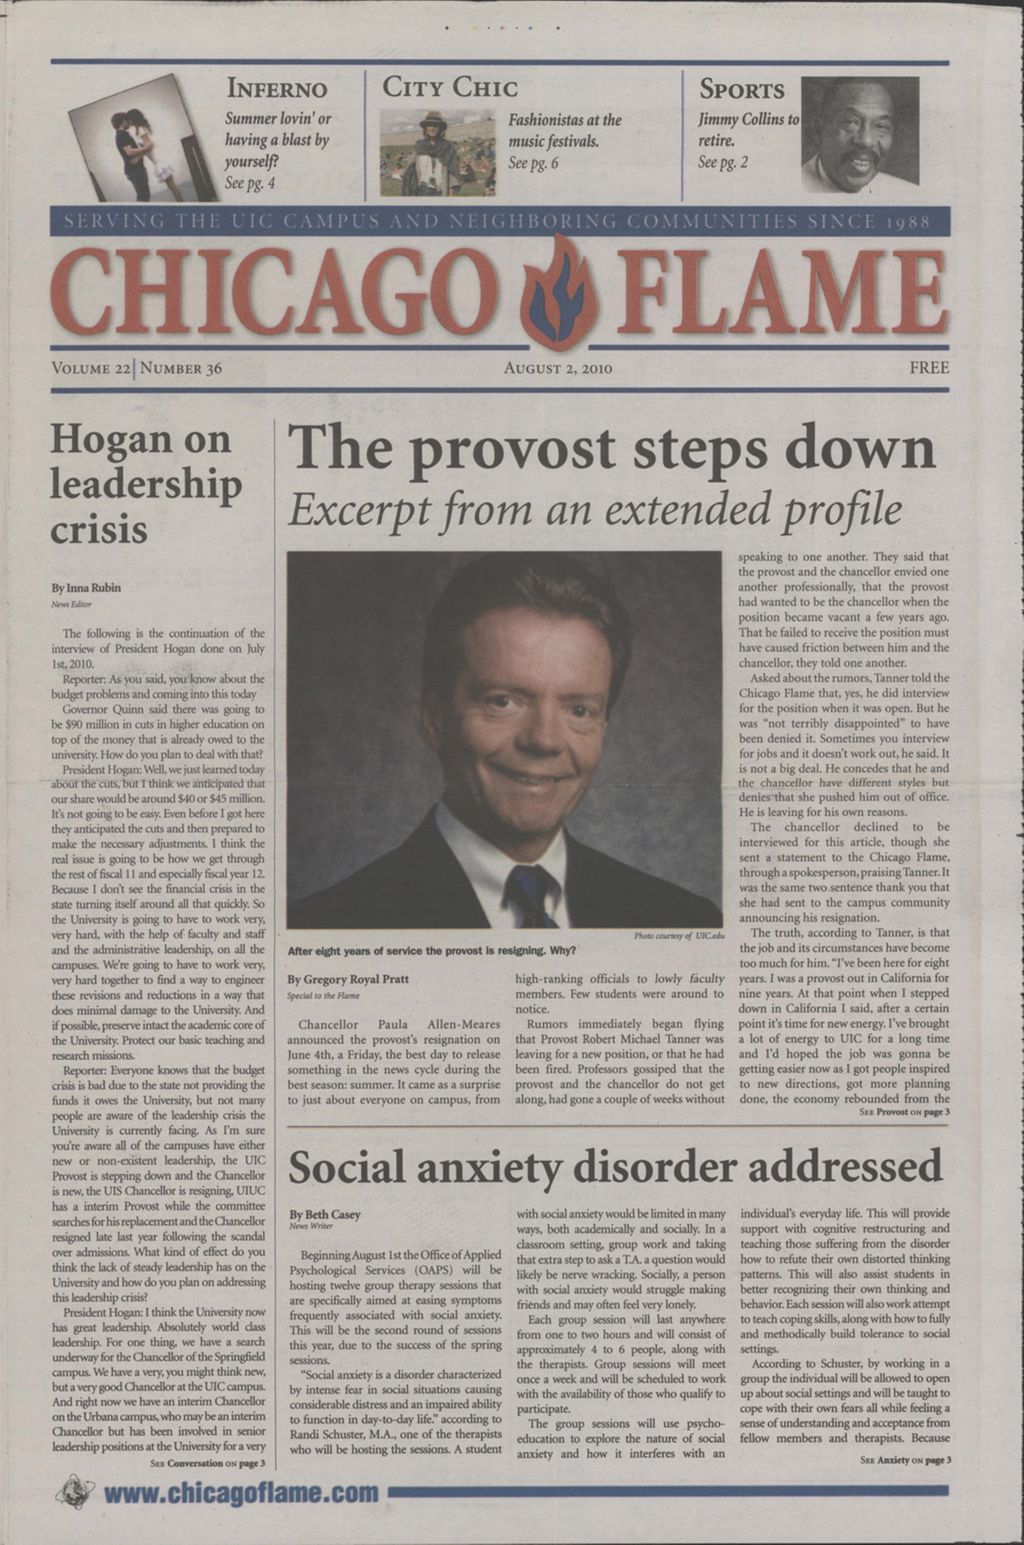 Miniature of Chicago Flame (August 2, 2010)